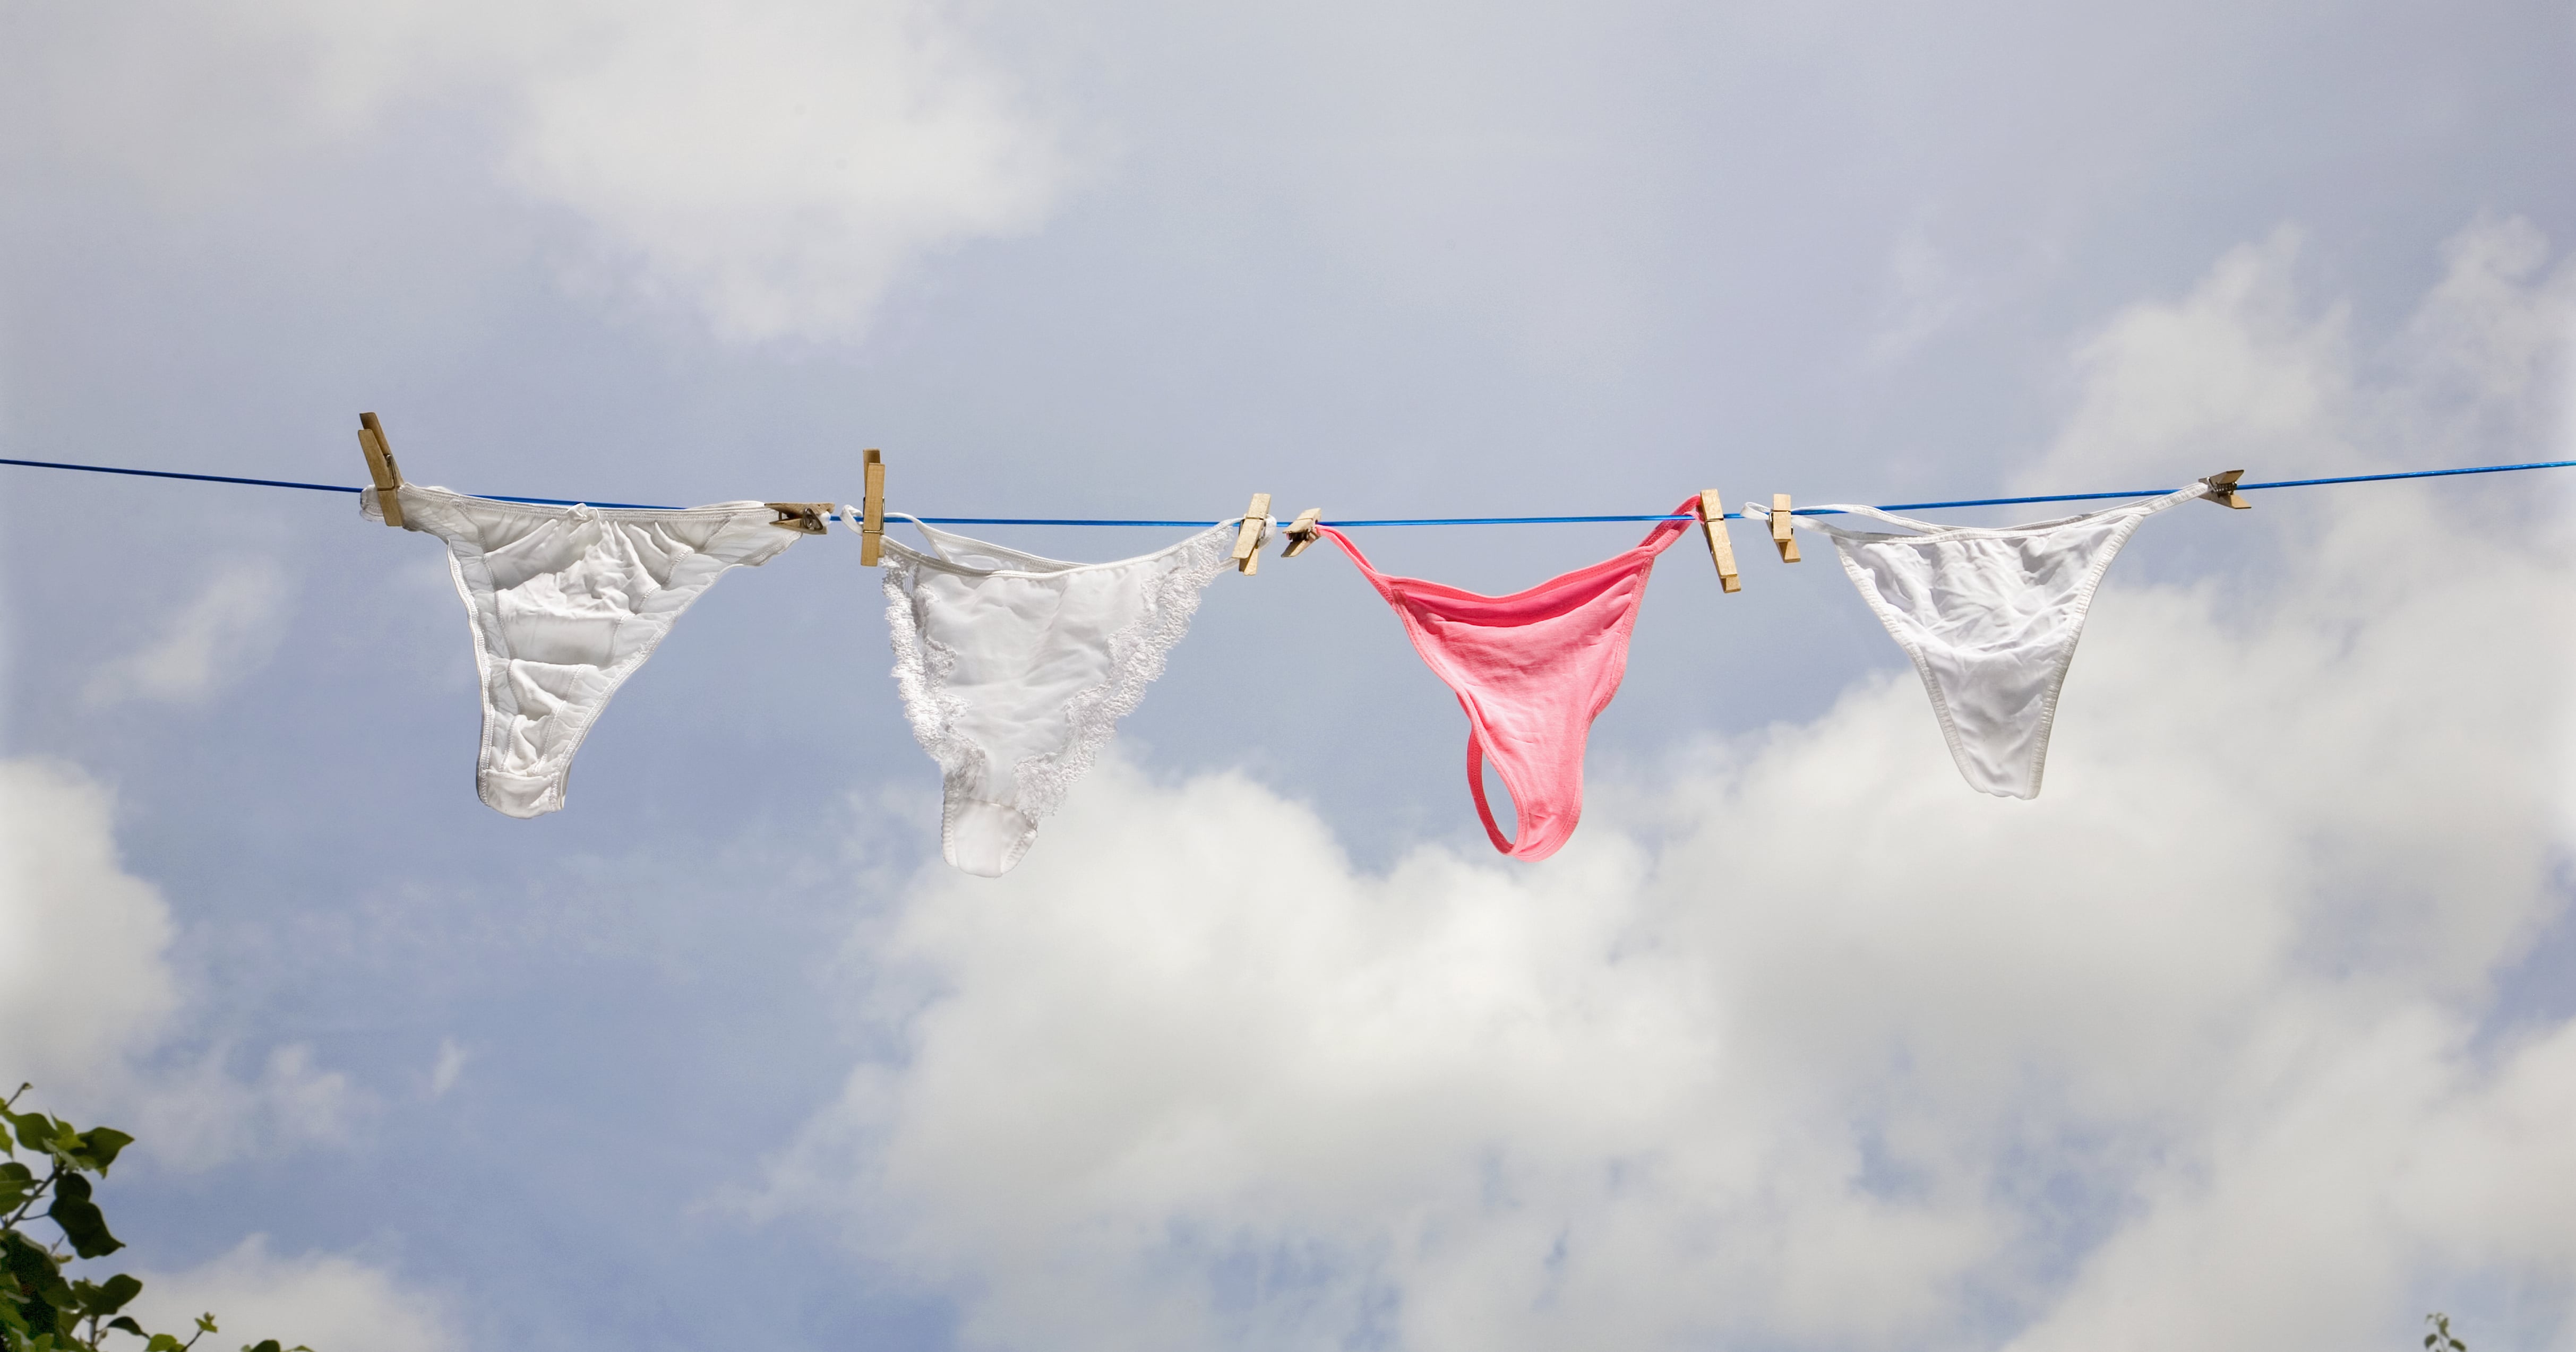 On the meaning of color in underwear, by Dishkady